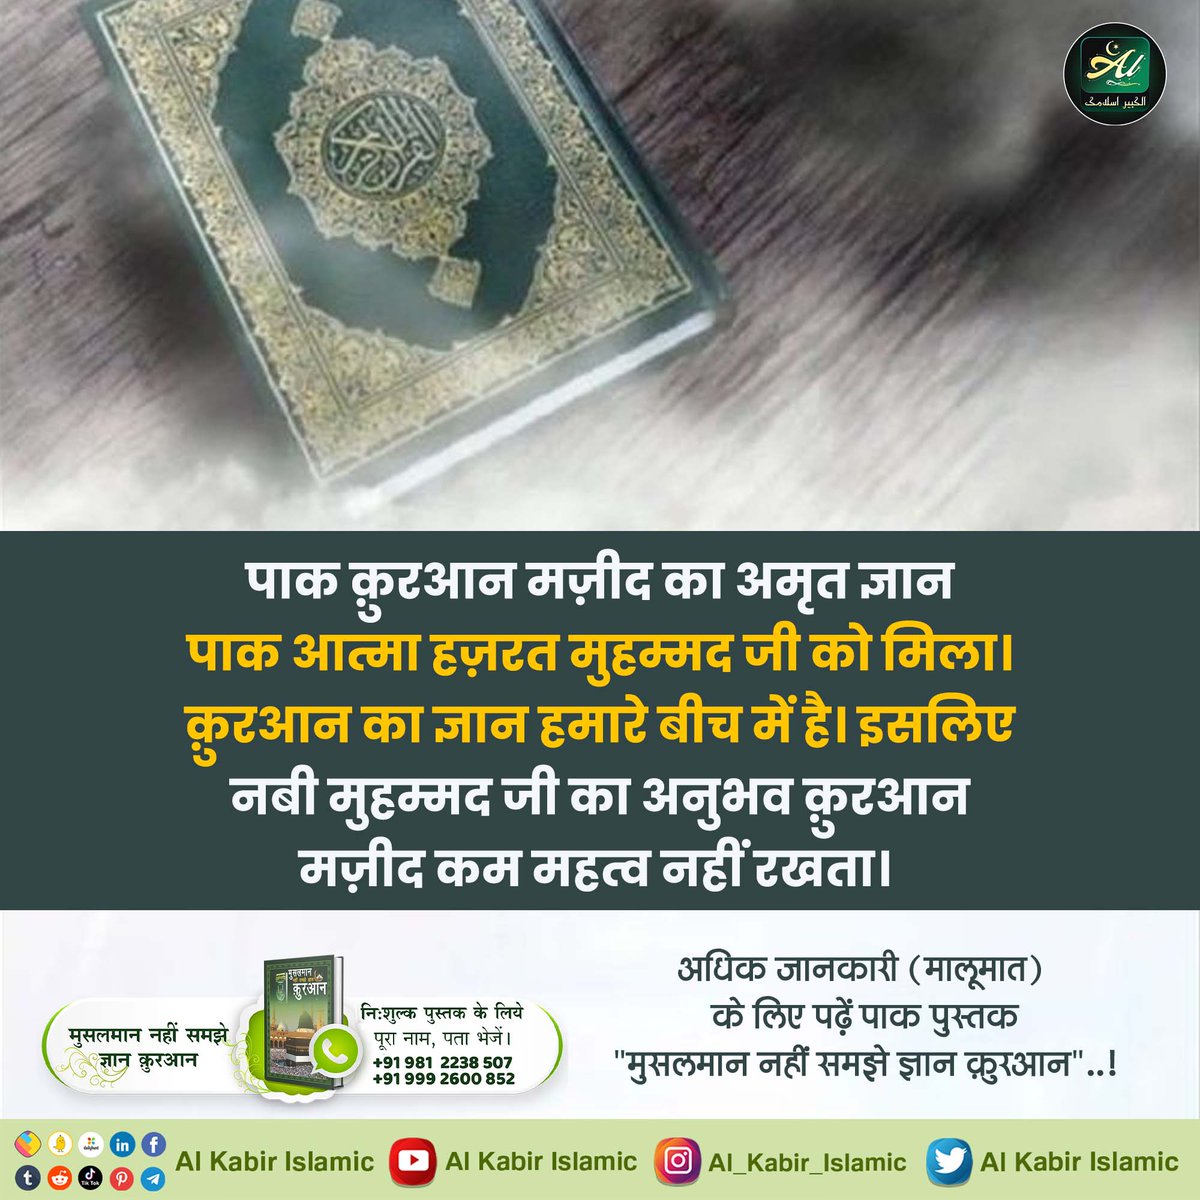 #अल्लाह_का_इल्म_बाखबर_से_पूछो
The sacred soul Hazrat Muhammad Ji received the nectar of knowledge of the Holy Quran. If Hazrat Muhammadji was there then the knowledge of Quran is among us. Therefore, the experience of Prophet Muhammad is no less important than the Quran Majeed.